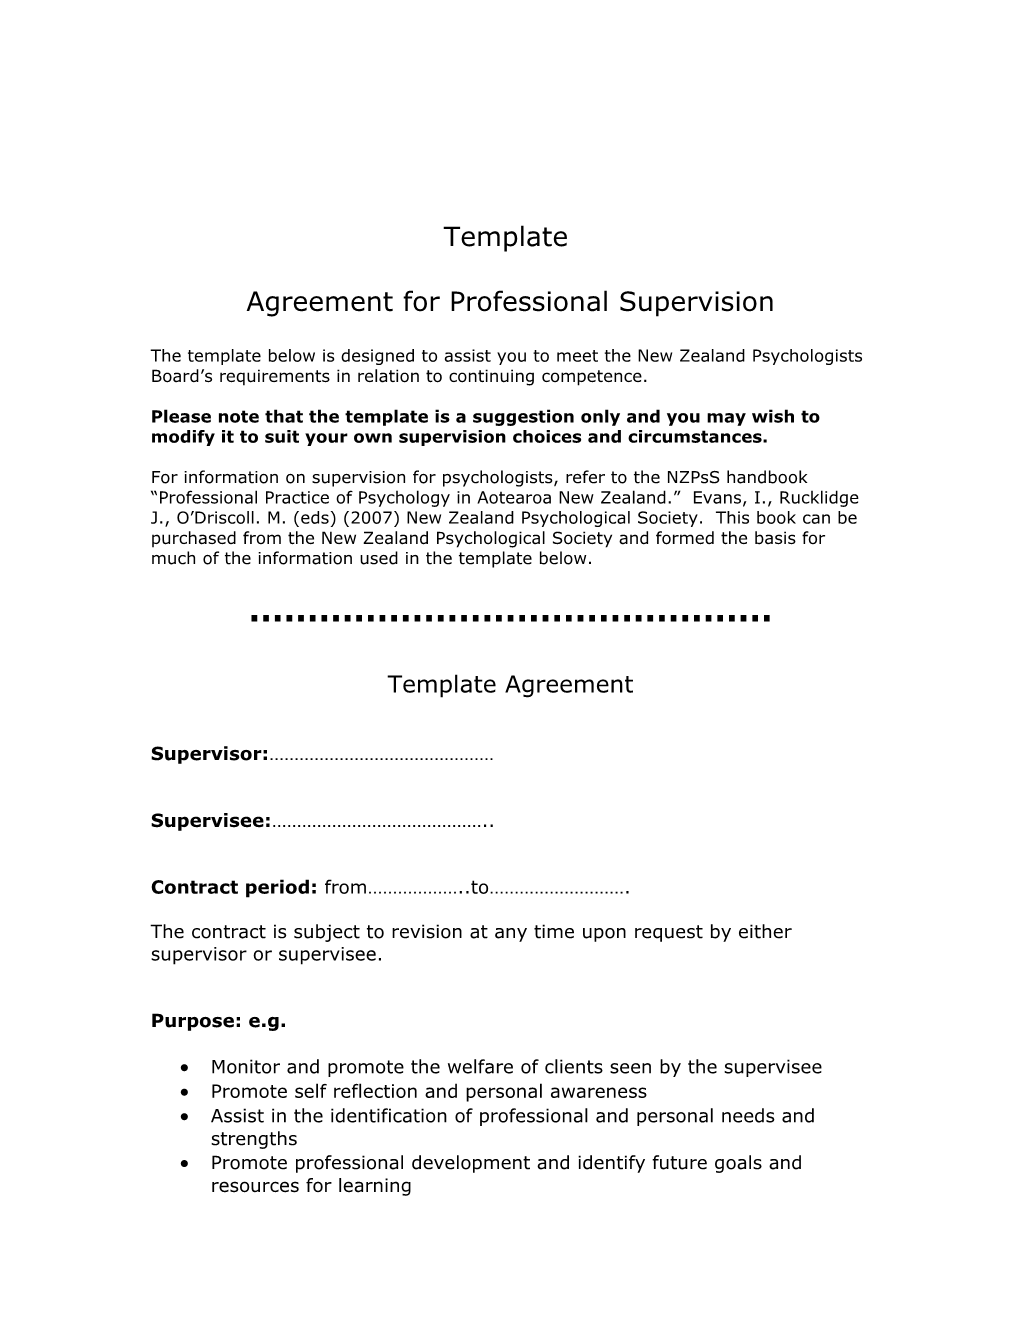 Agreement for Professional Supervision